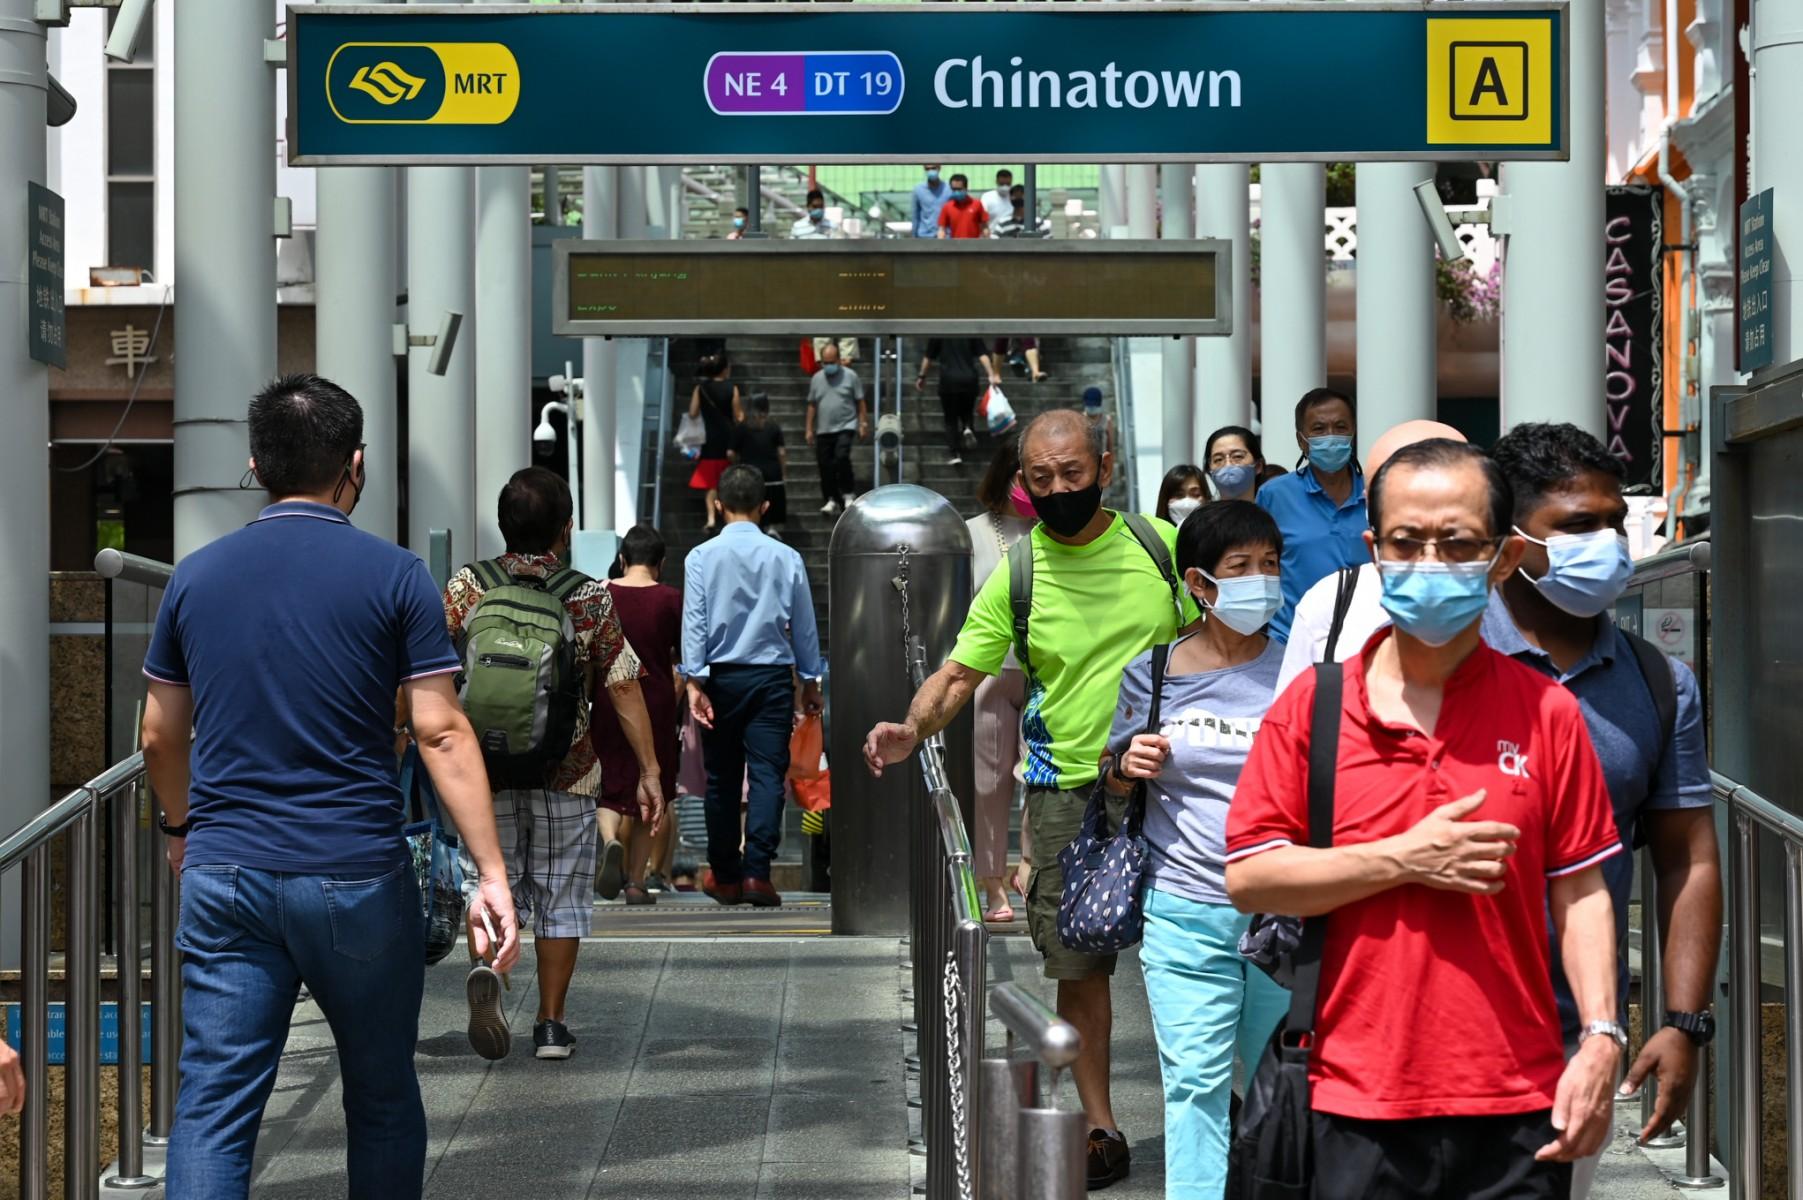 People walk in and out of the MRT subway station at the Chinatown district in Singapore on Jan 10. Photo: AFP